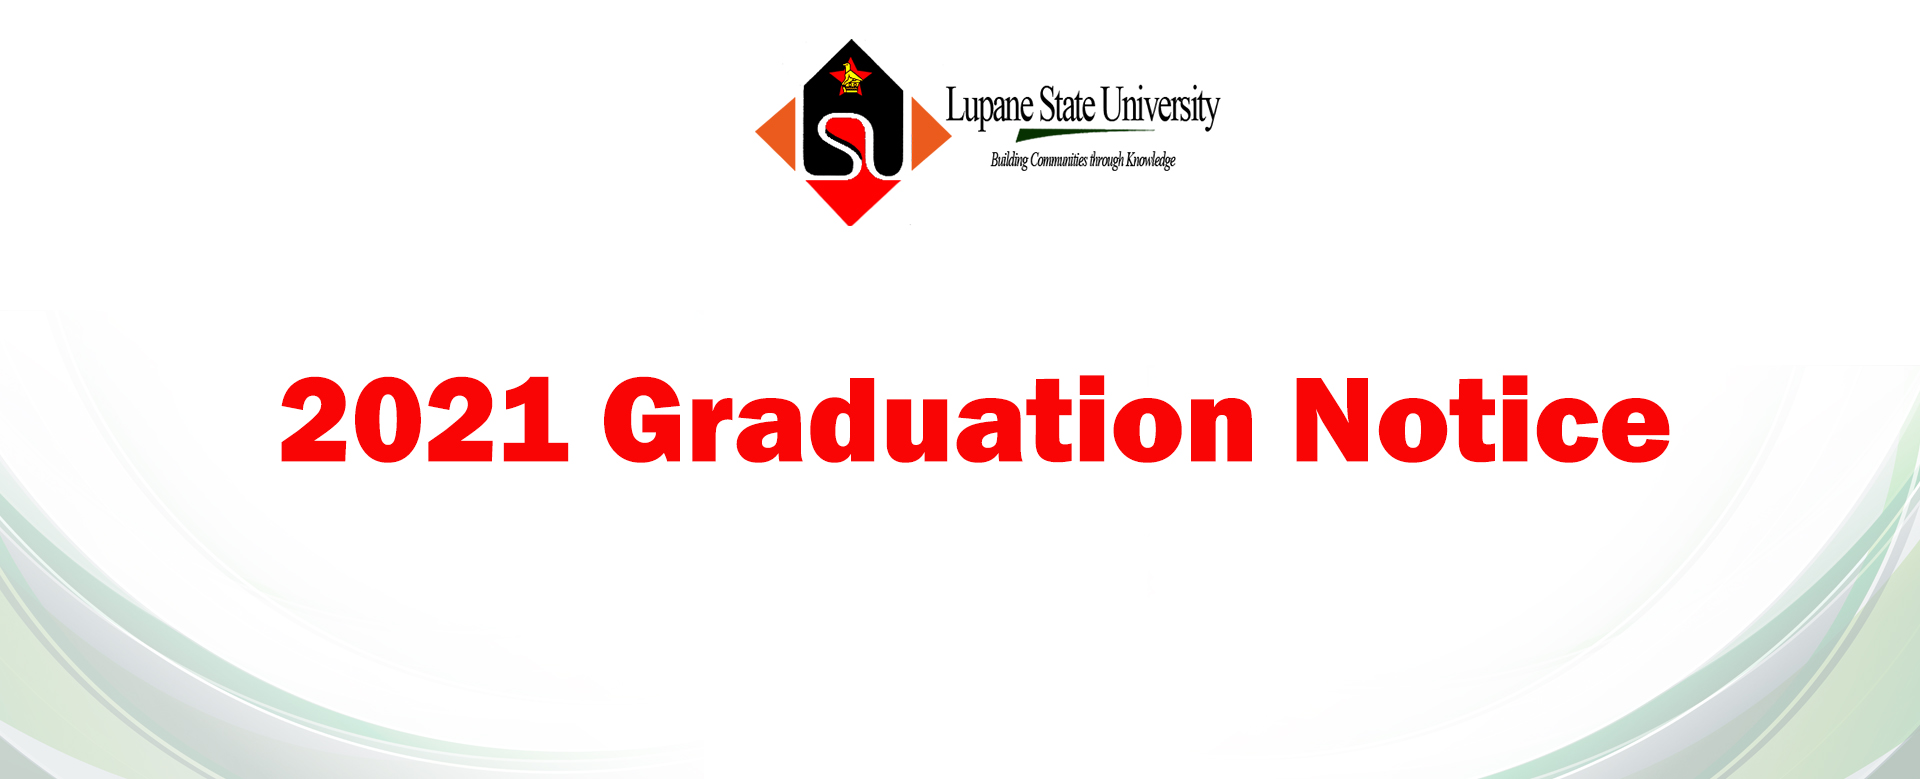 Ammended Graduation Notice